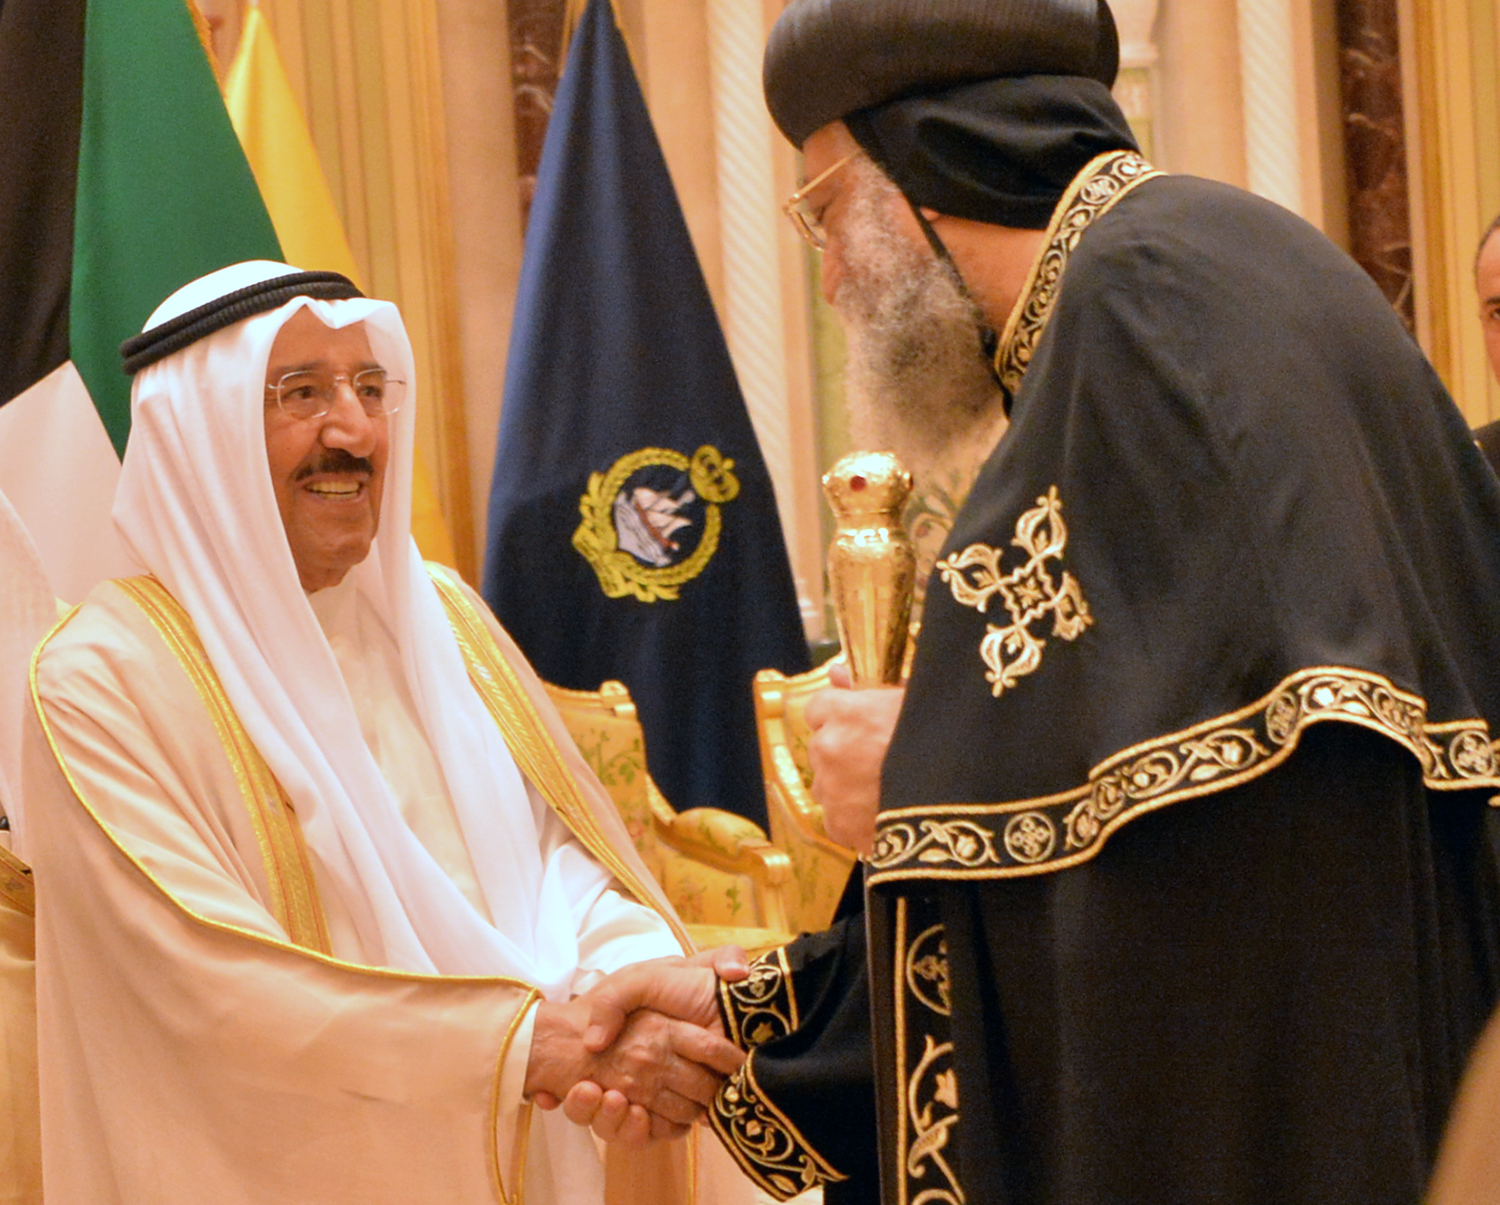 His Highness the Amir Sheikh Sabah Al-Ahmad Al-Jaber Al-Sabah receives Tawadros II the Pope of Alexandria and Patriarch of the See of St. Mark